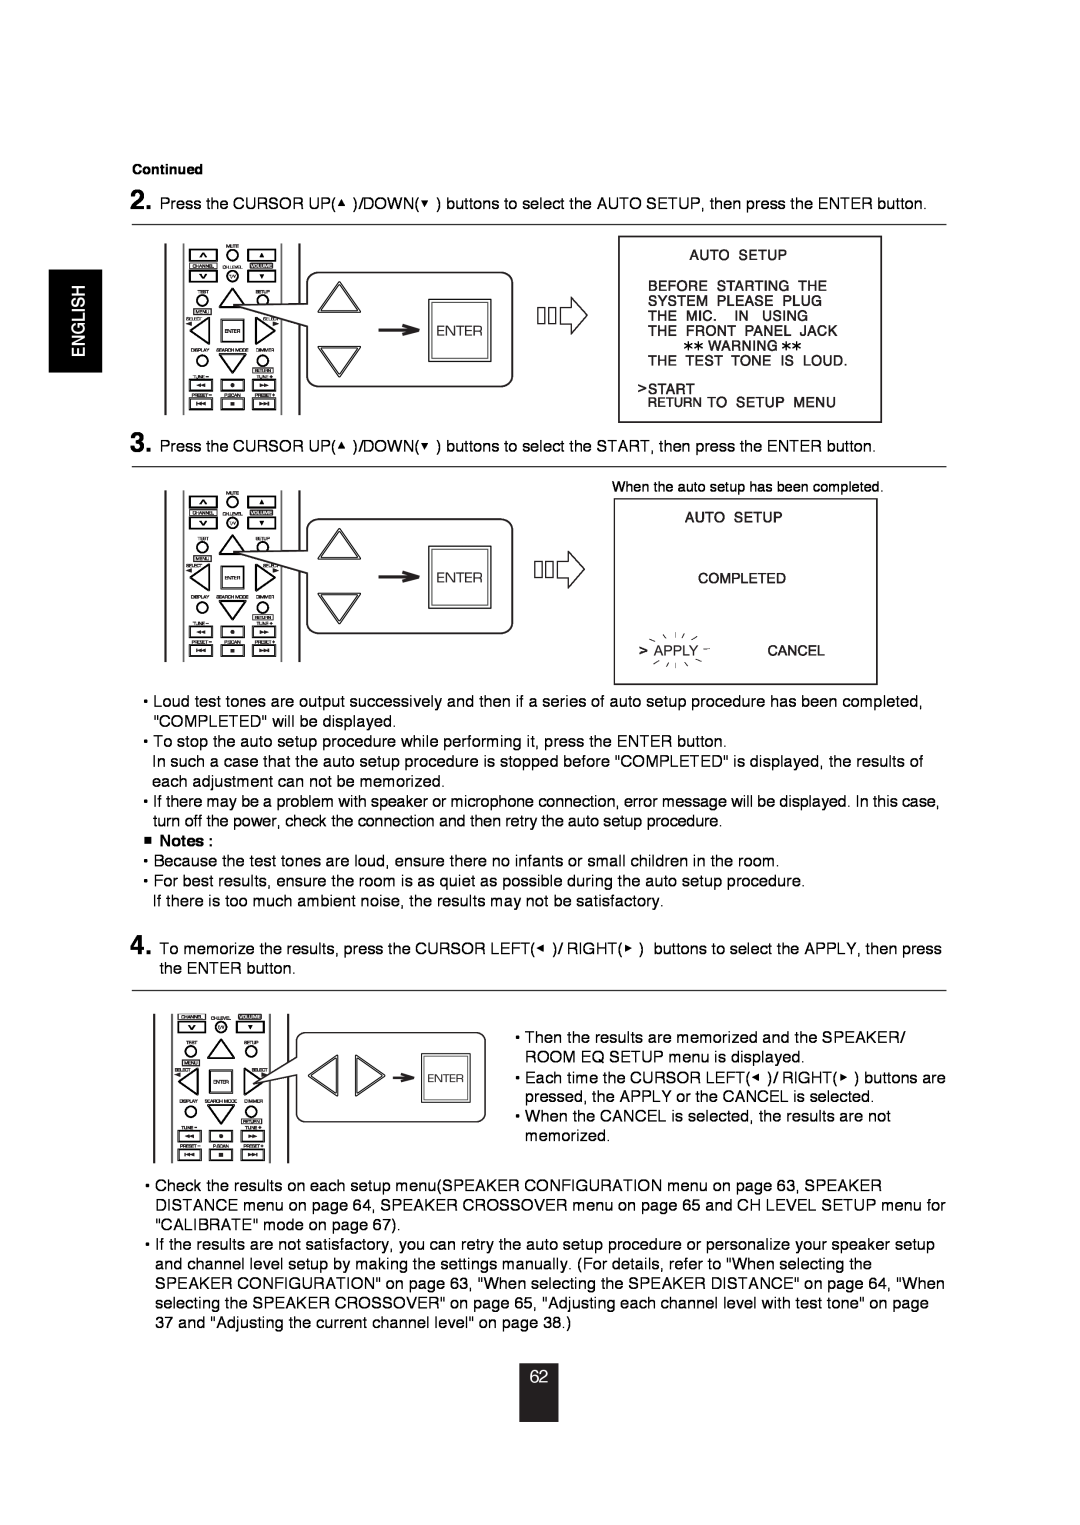 Sherwood R-872 manual English, Continued, When the auto setup has been completed 